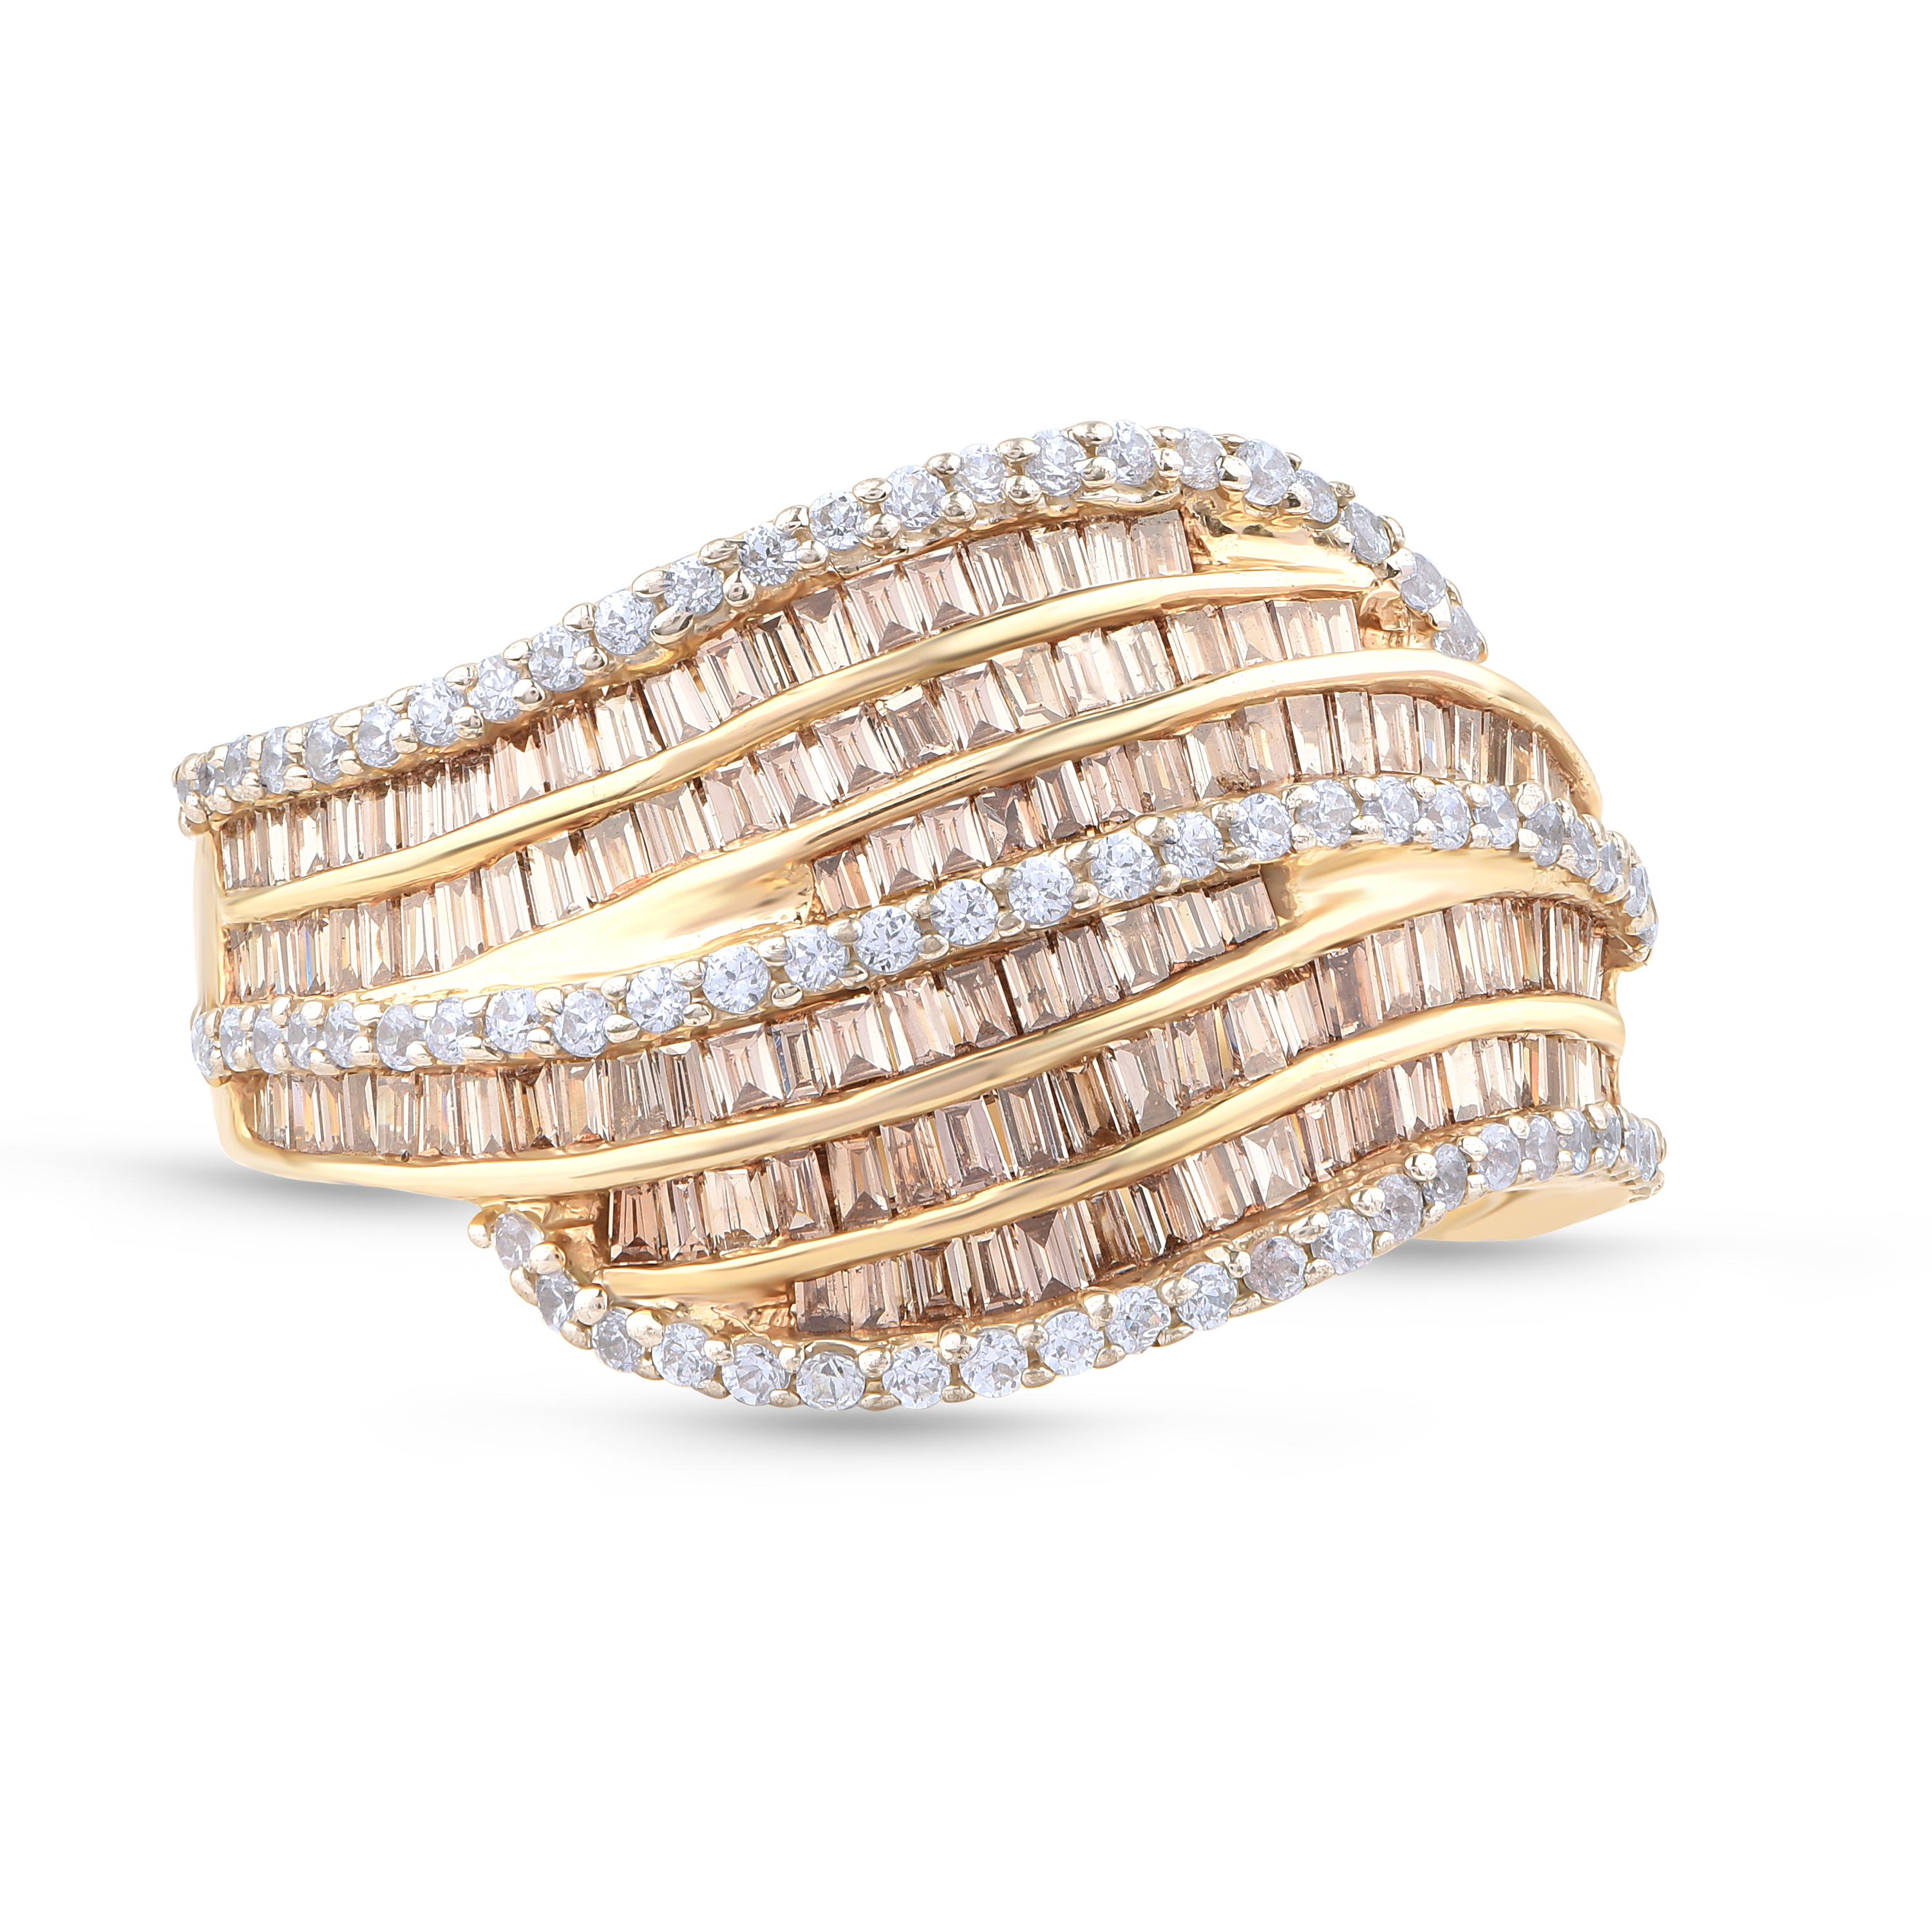 Designed in 18-karat yellow gold this gorgeous ring is studded with 170 cognac and 75 brilliant cut diamonds in prong and channel setting. The diamonds are graded H-I Color, I2 Clarity. 